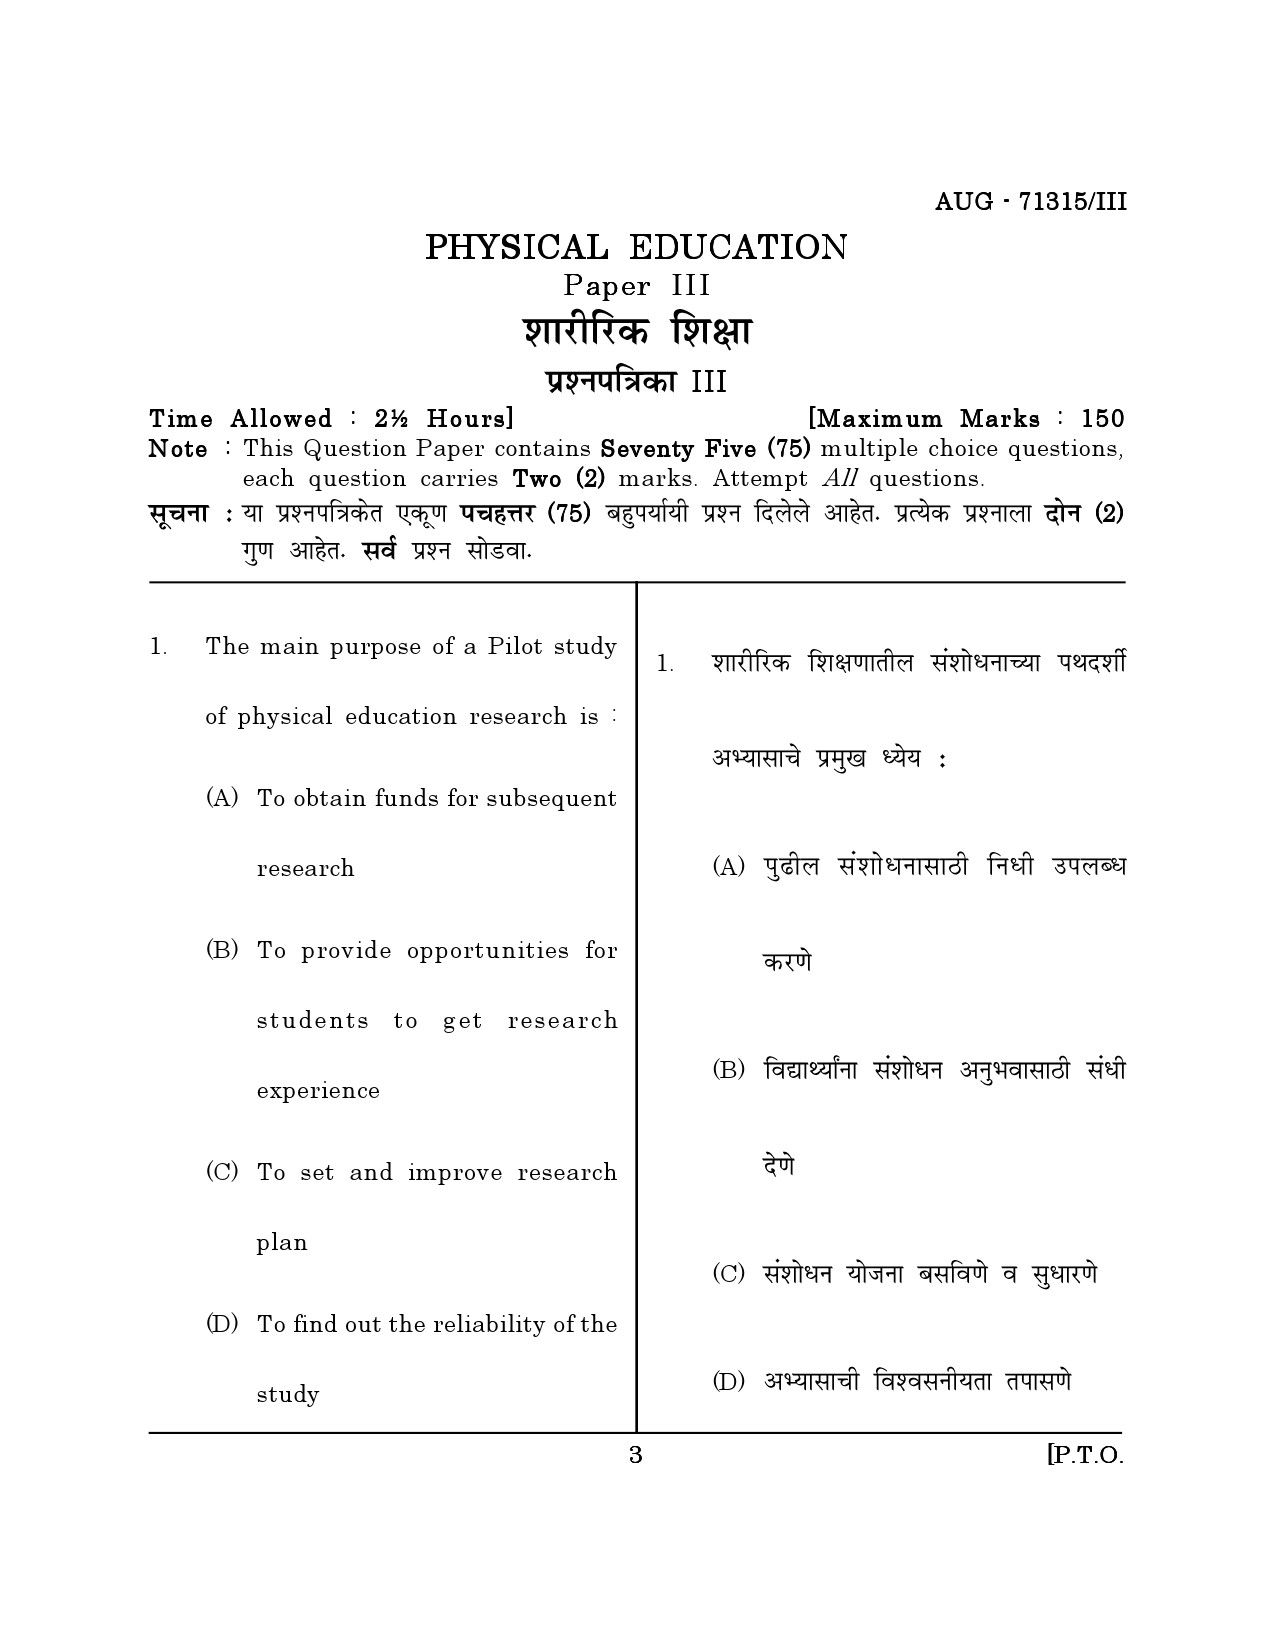 Maharashtra SET Physical Education Question Paper III August 2015 2